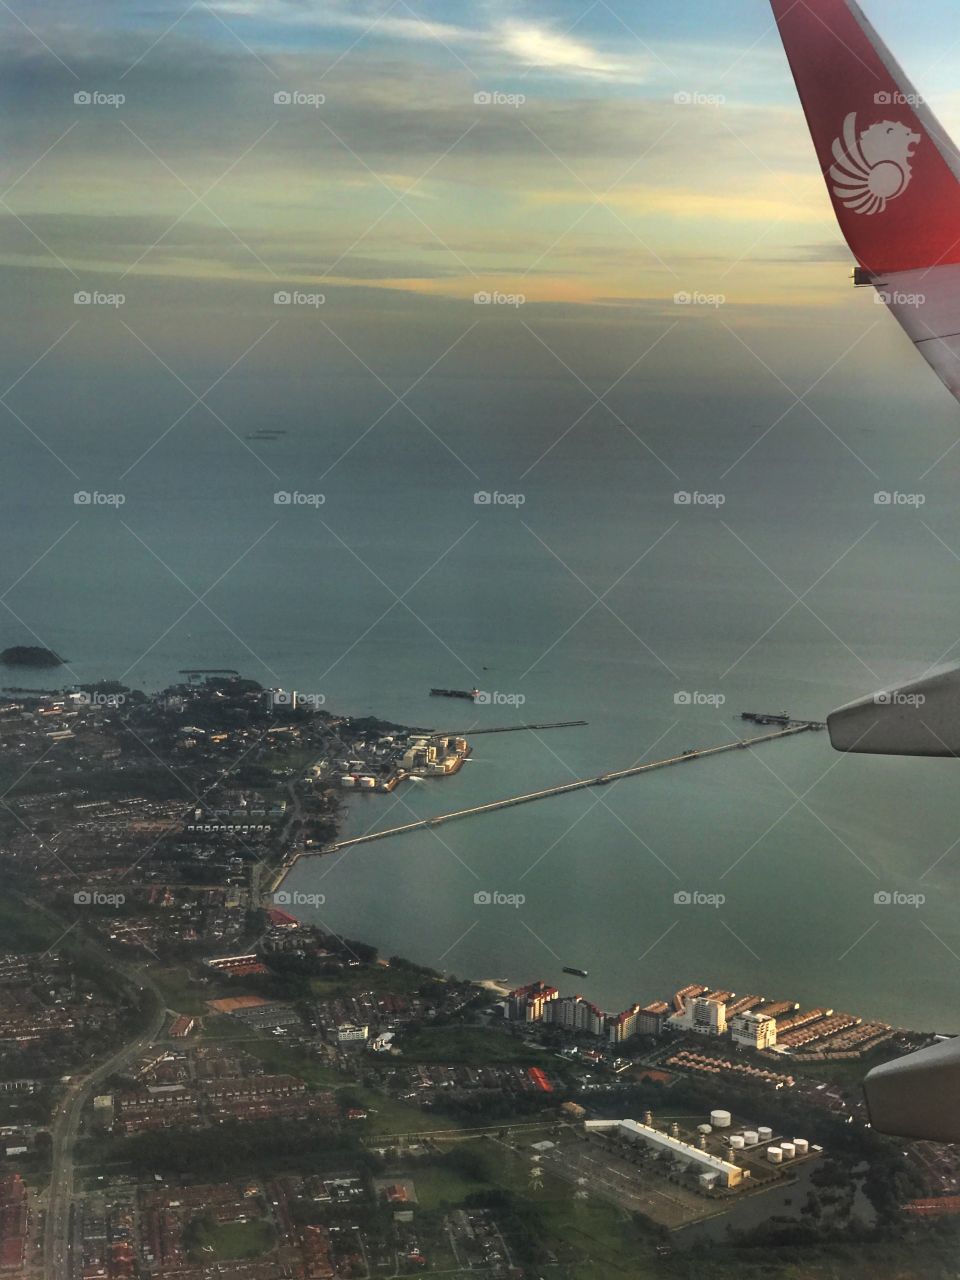 Harbour in the background and colourful cloudy evening sky makes a perfect landscape photo at above Malaysia from airplane 